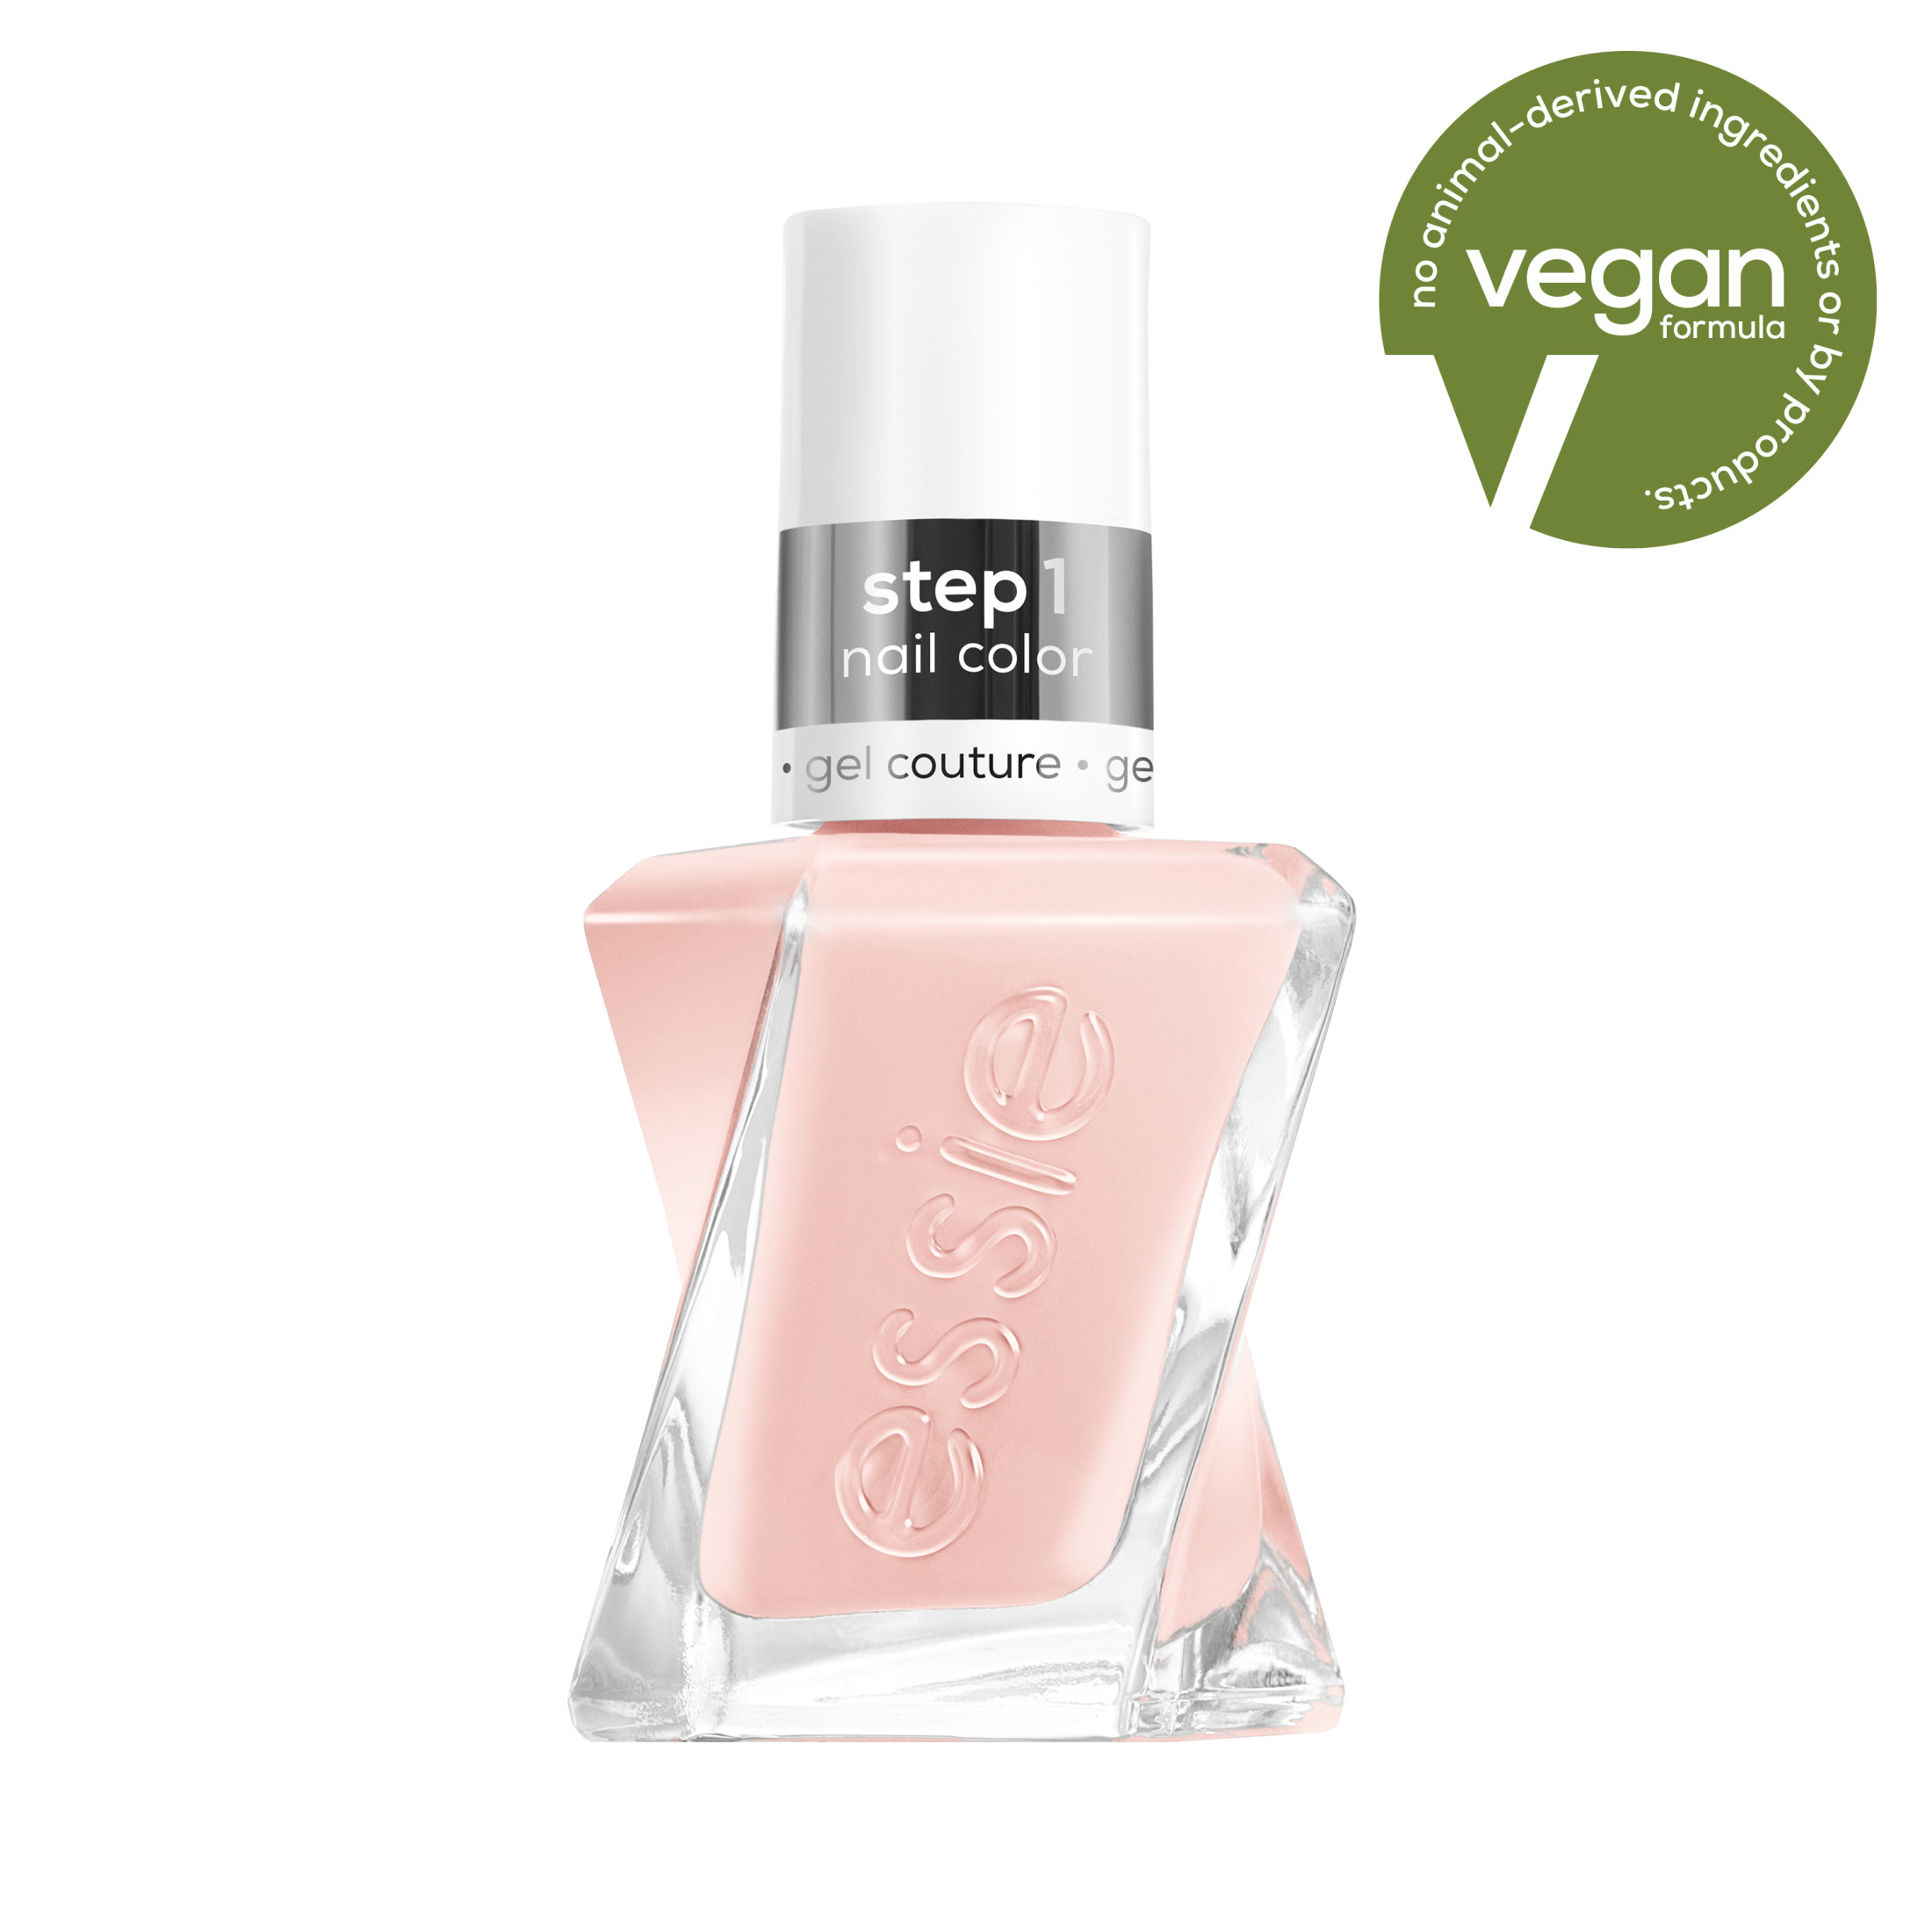 essie Gel Couture Nail Polish, Sheer Pink, Fairy Tailor, 0.46 fl oz Bottle - image 1 of 9